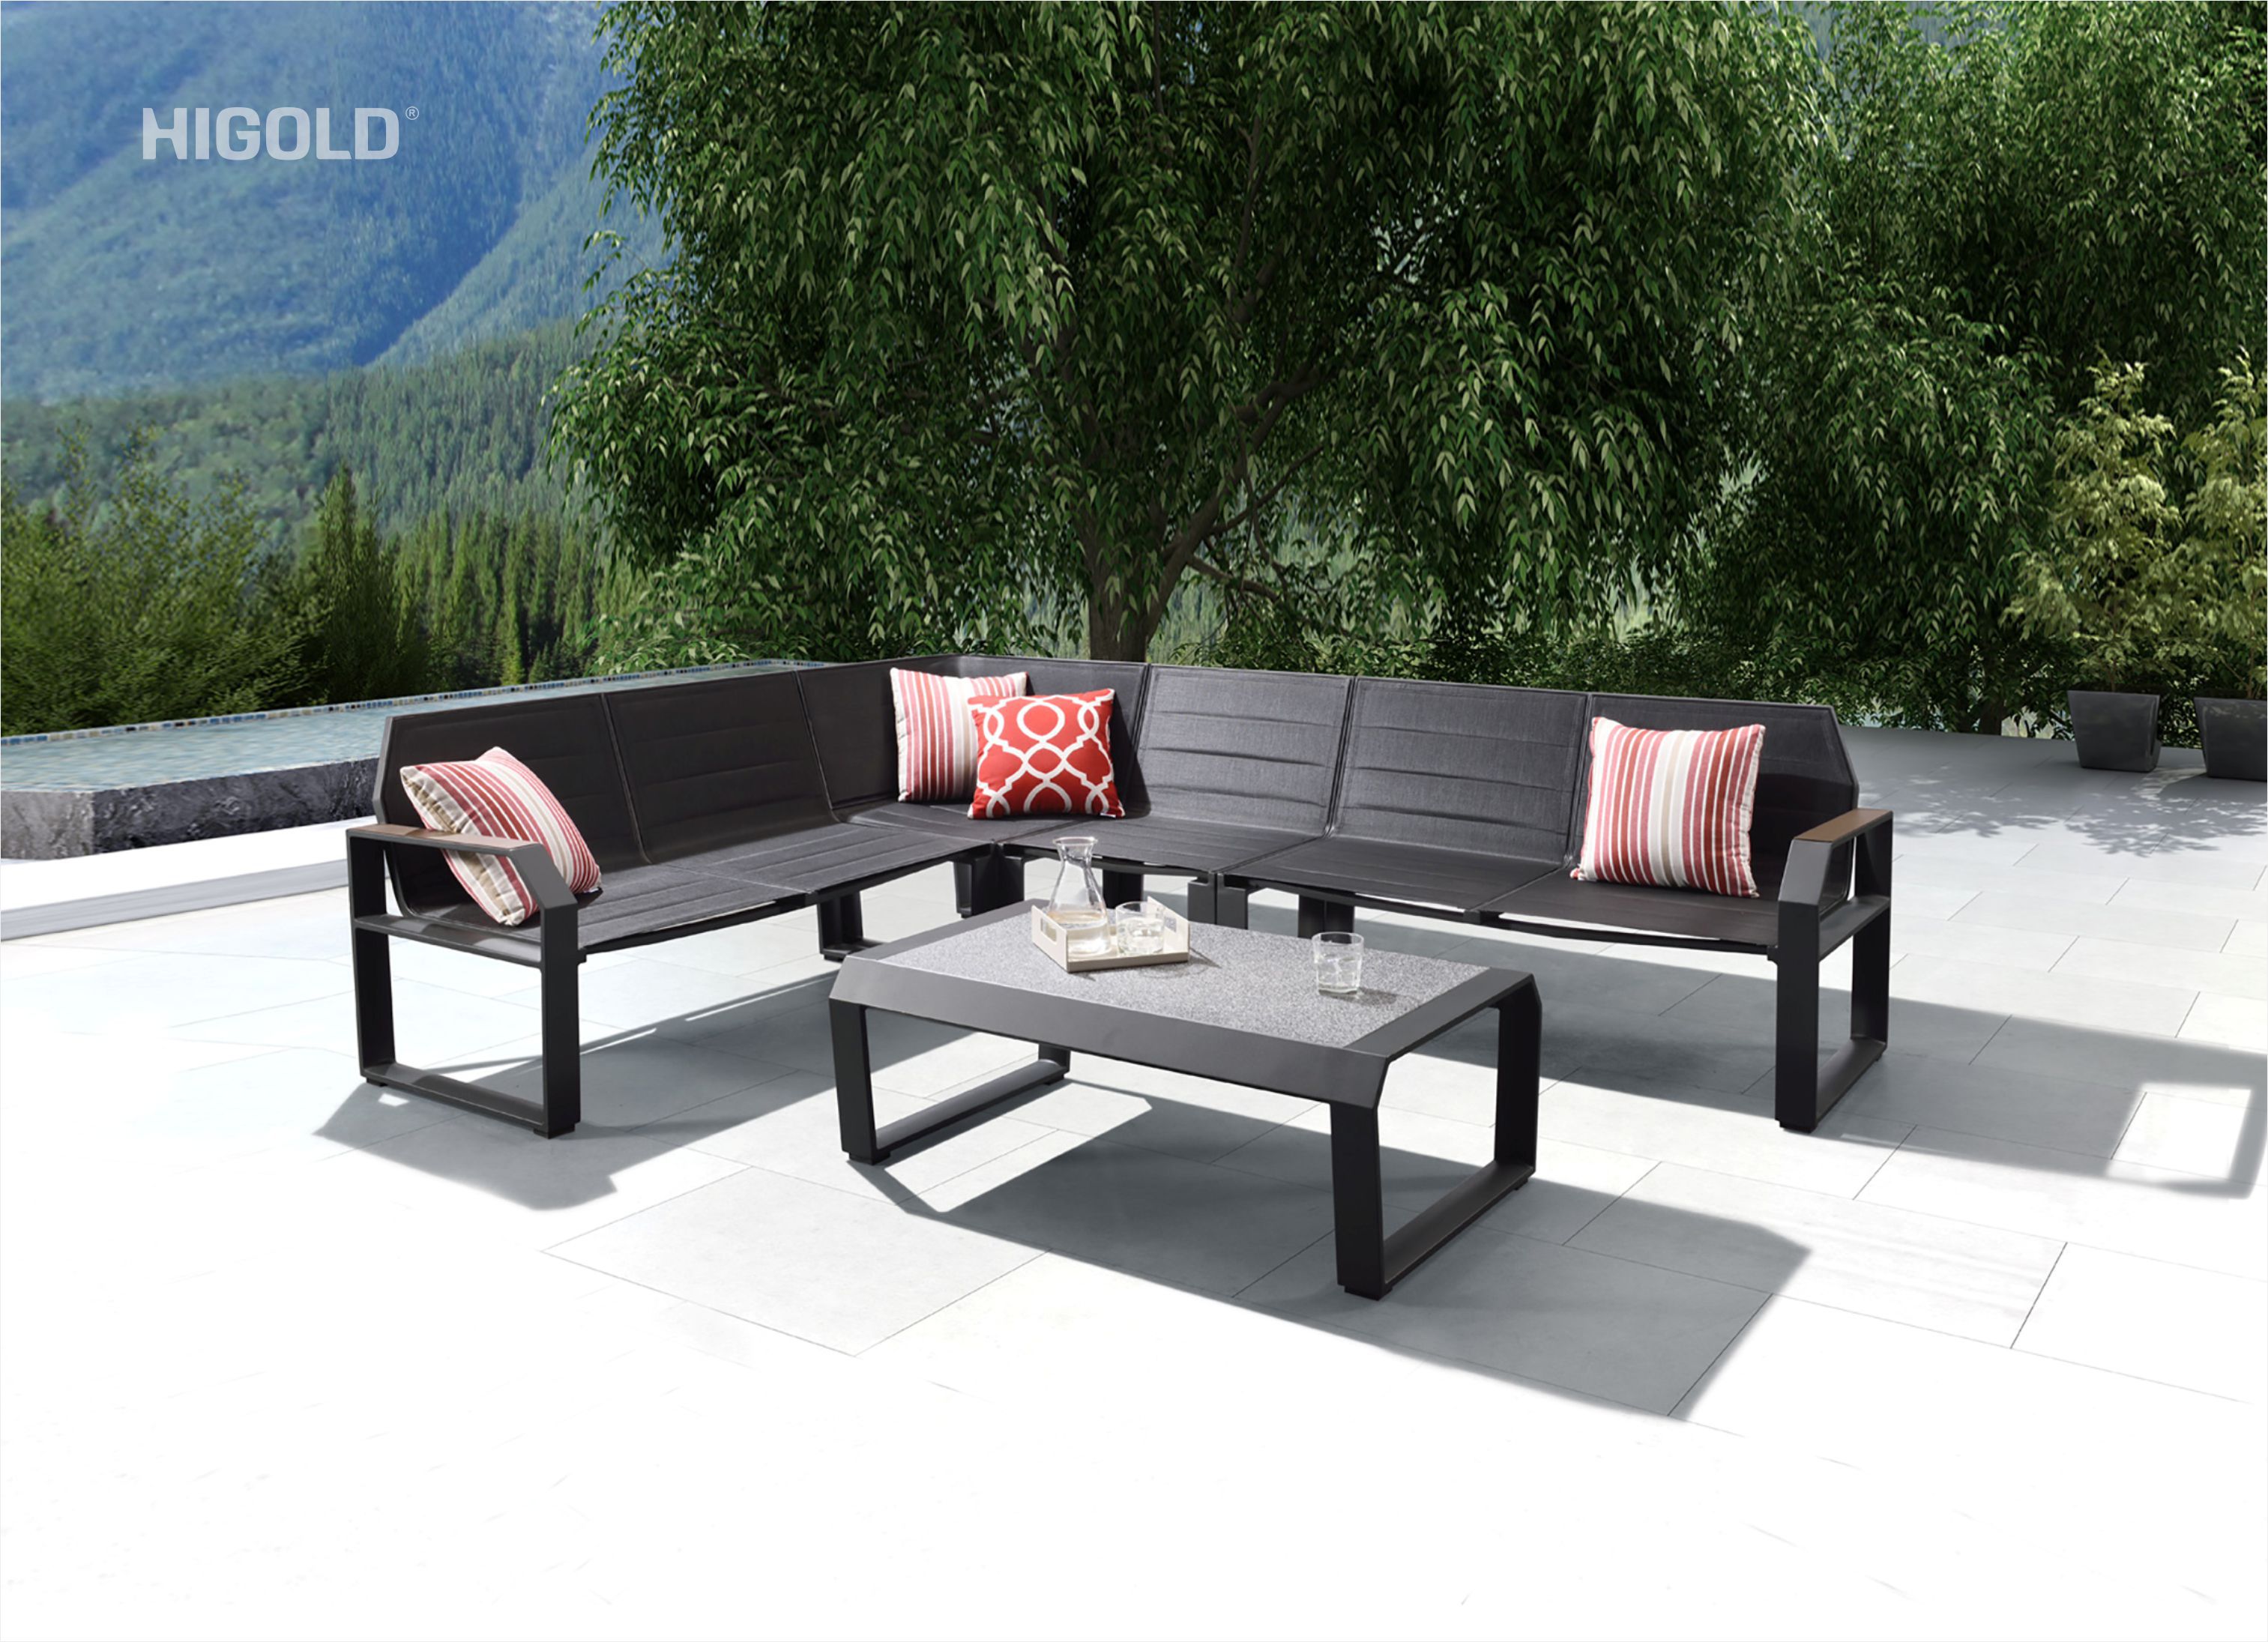 Nomad outdoor sectional sofa for 6 aluminum